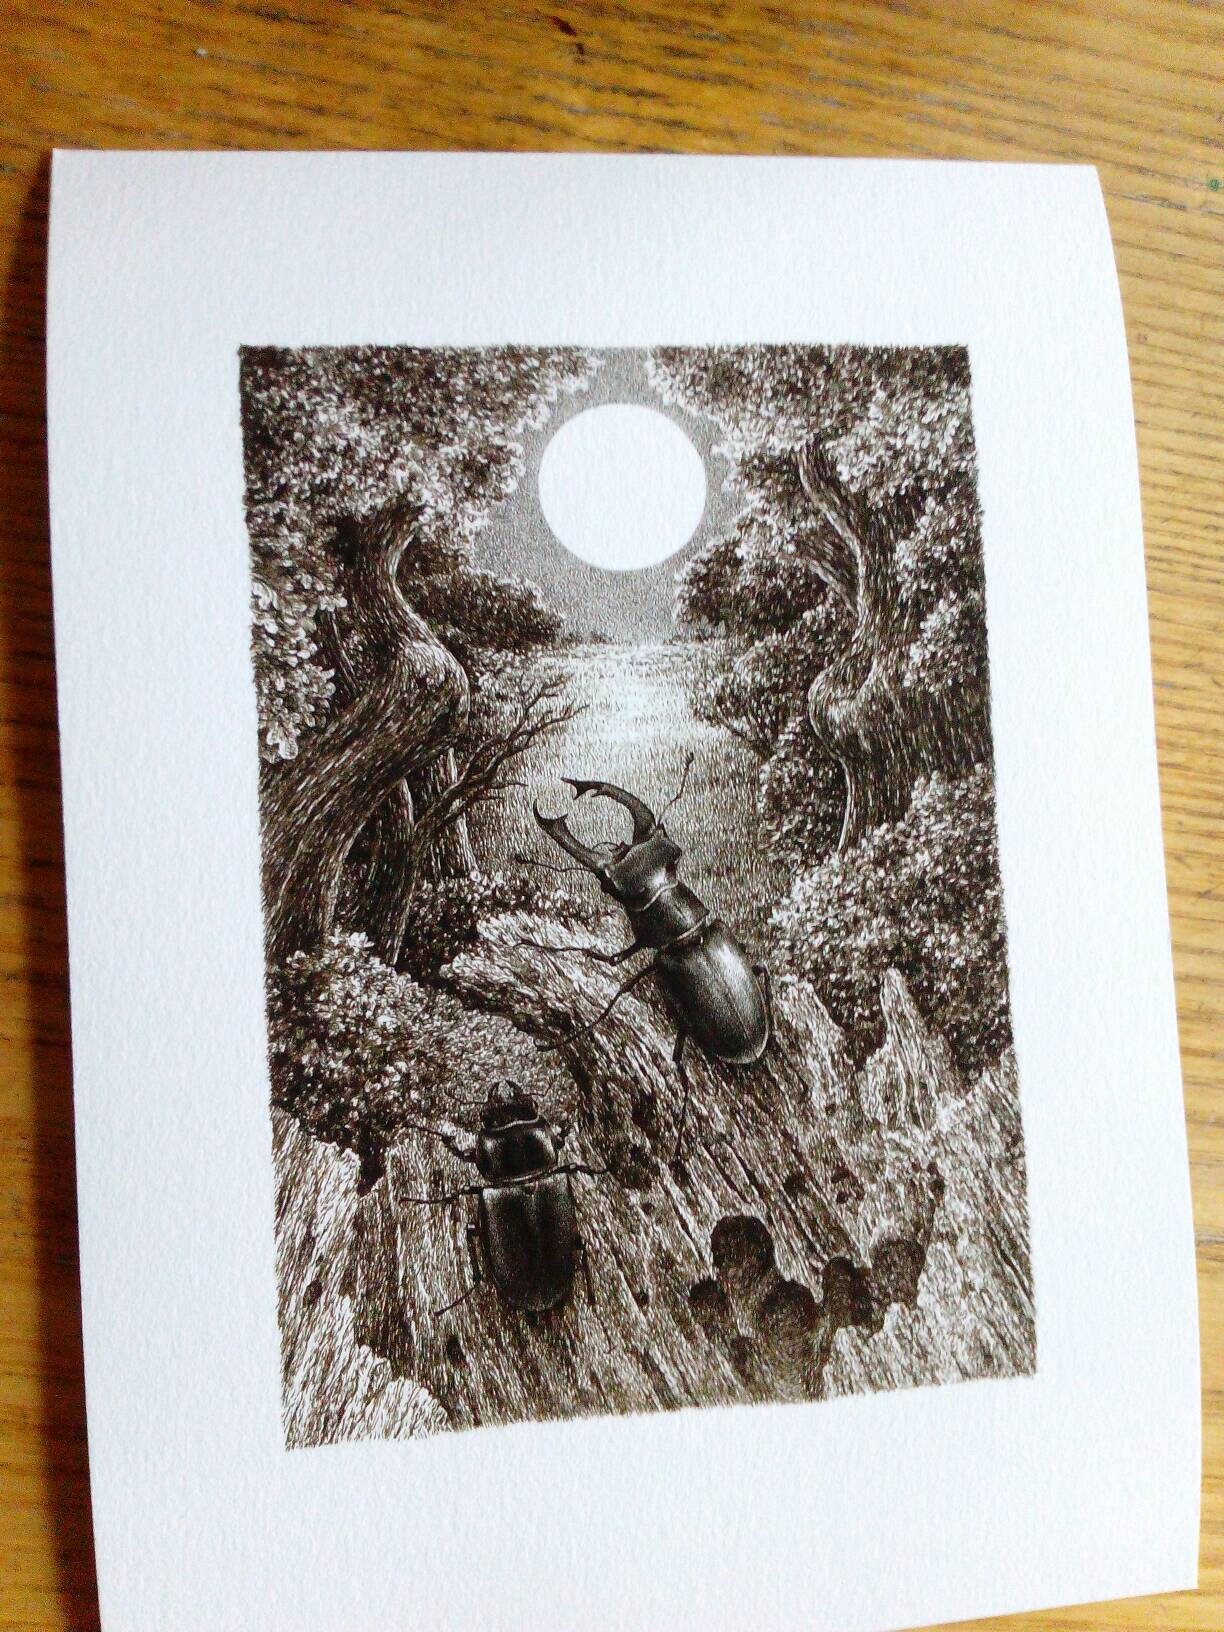 A4 sized print - Stag Beetles & Full Moon, limited edition